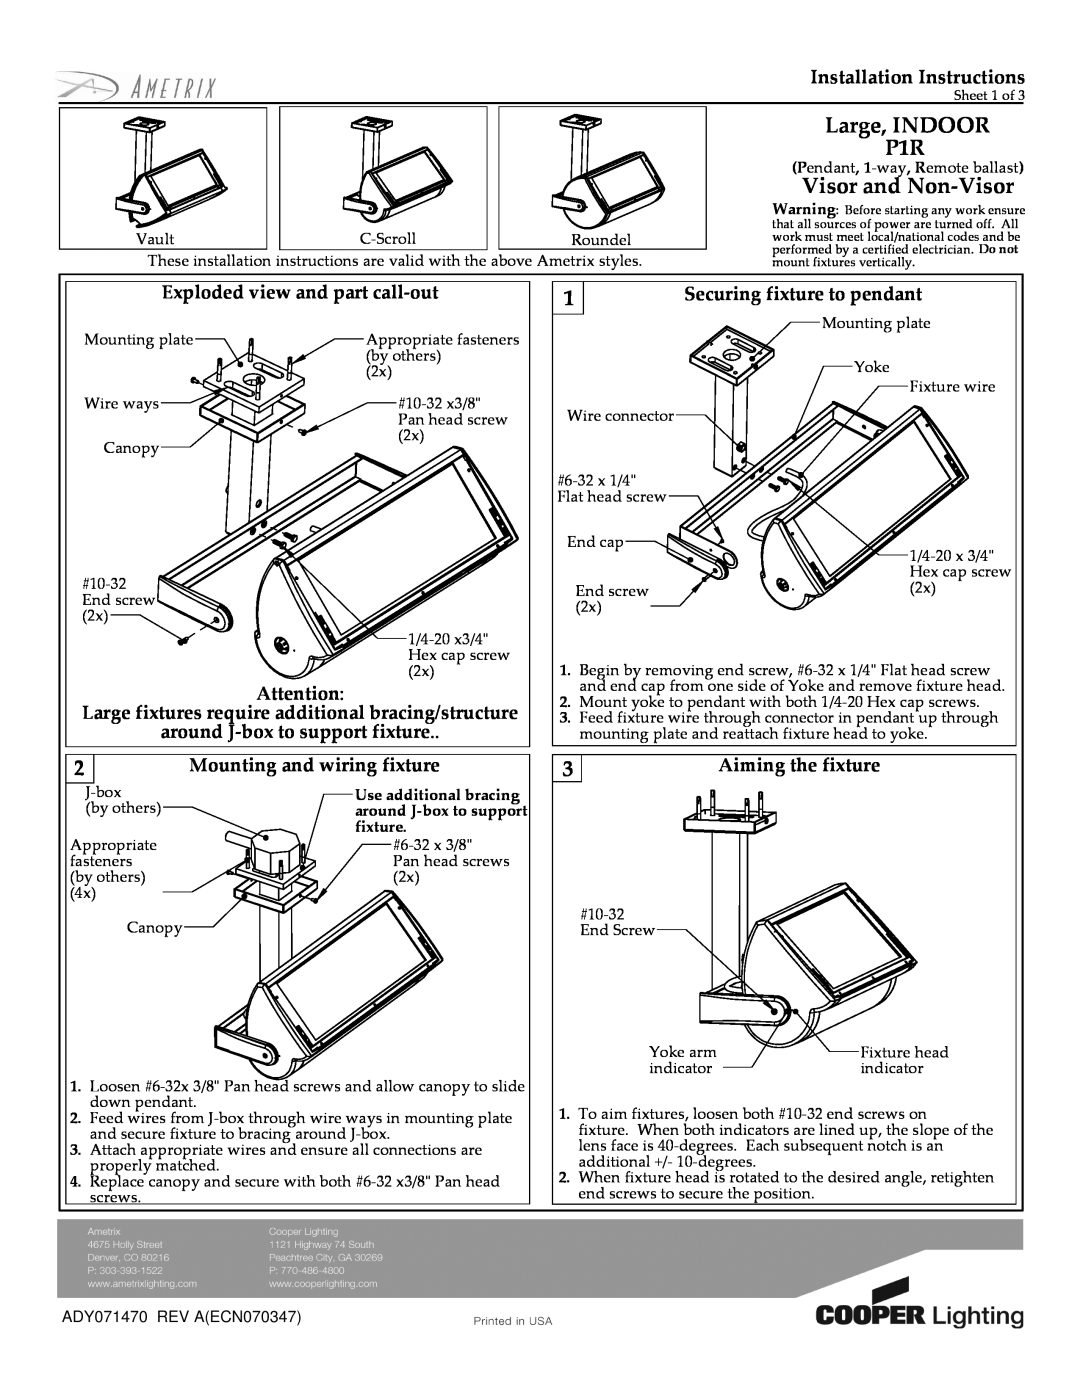 Cooper Lighting Indoor Lighting installation instructions Large, INDOOR P1R, Visor and Non-Visor, 3Aiming the fixture 